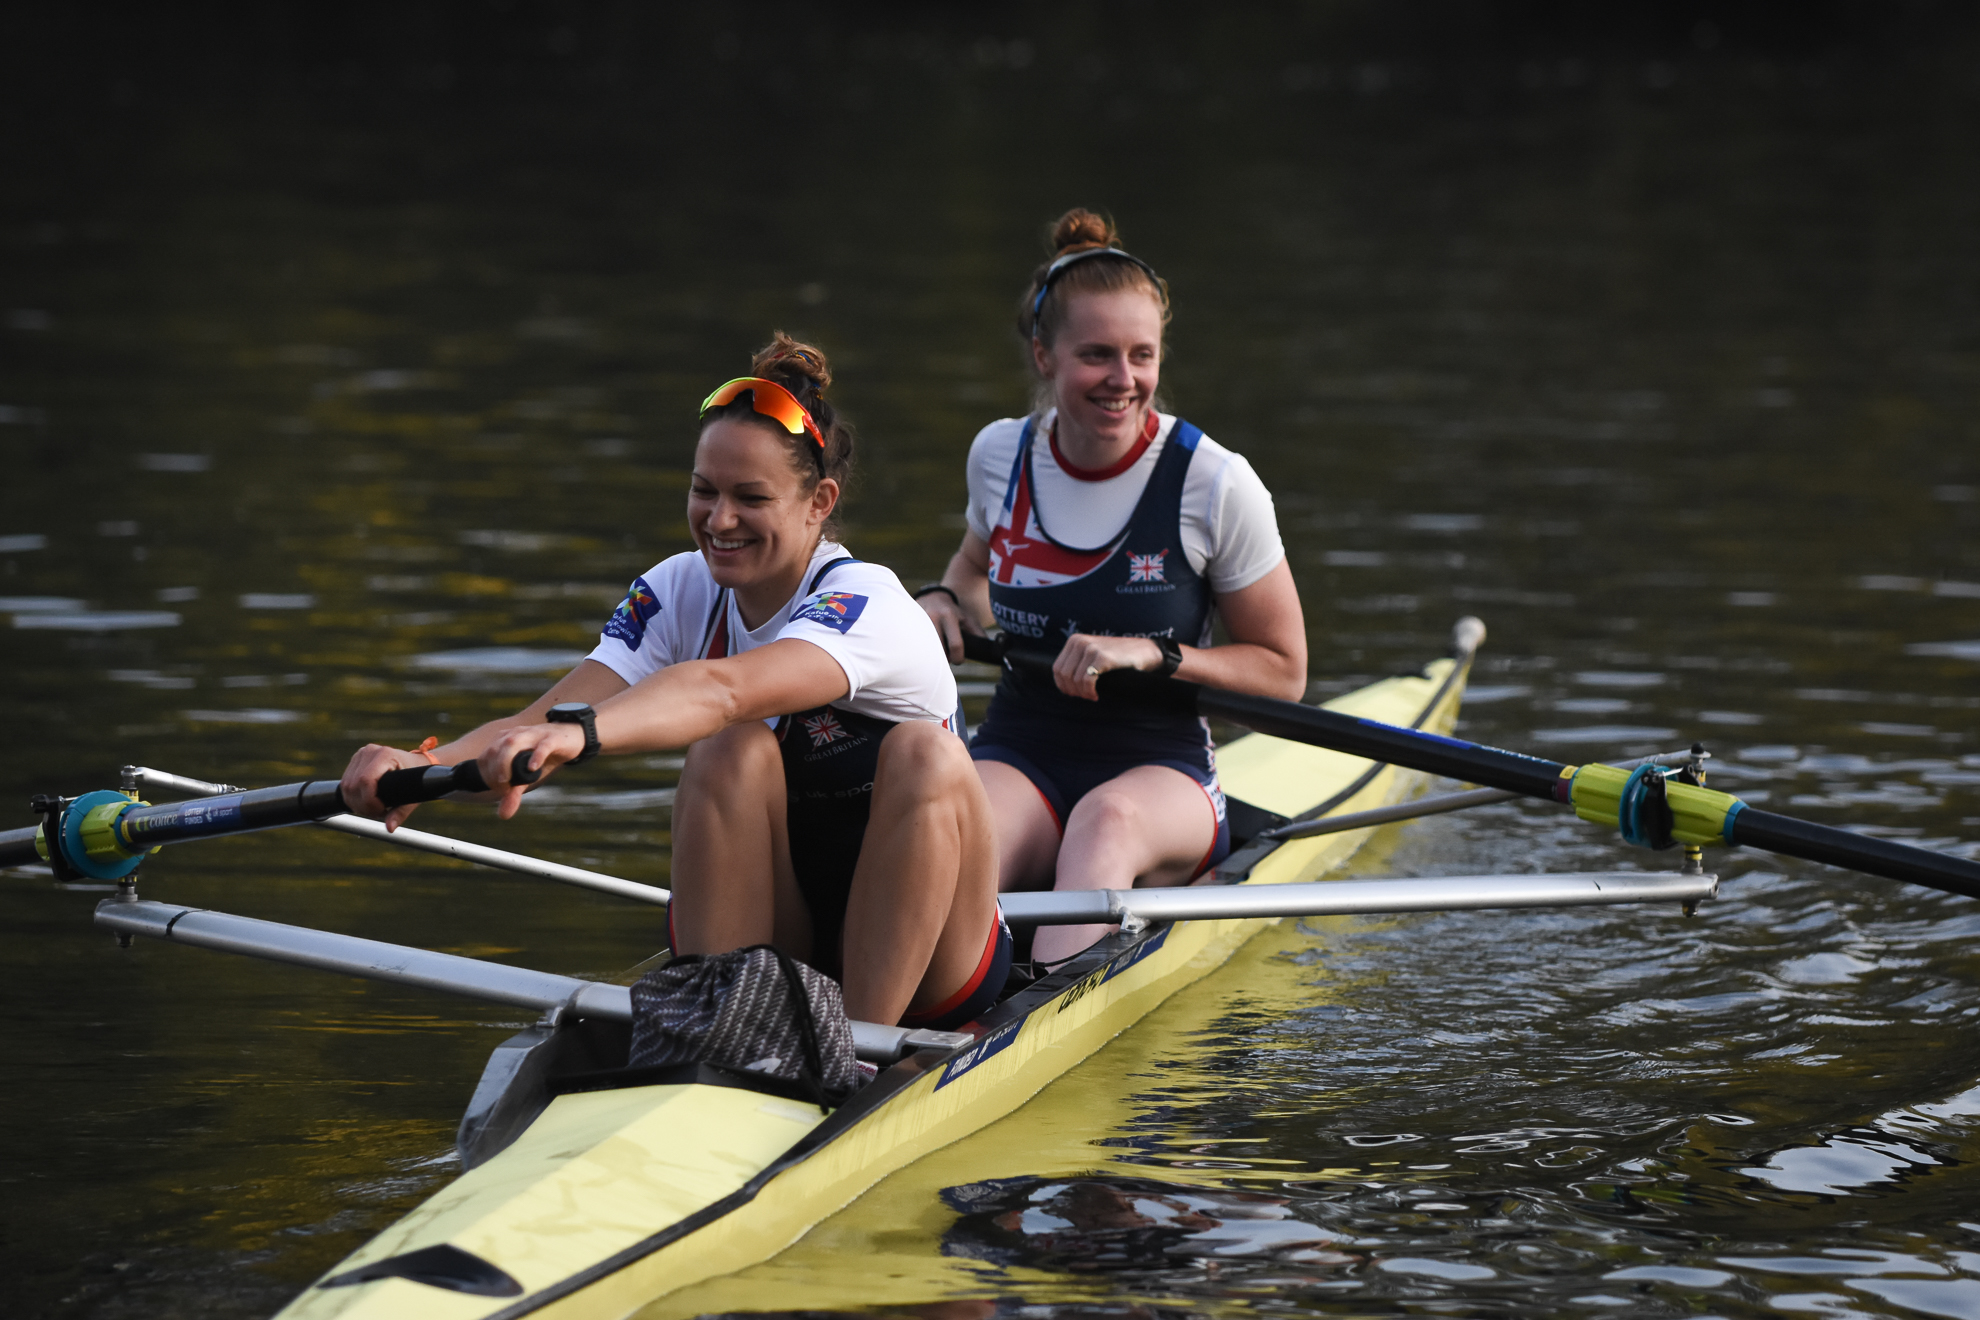 Aughnacloy native to row for Team GB